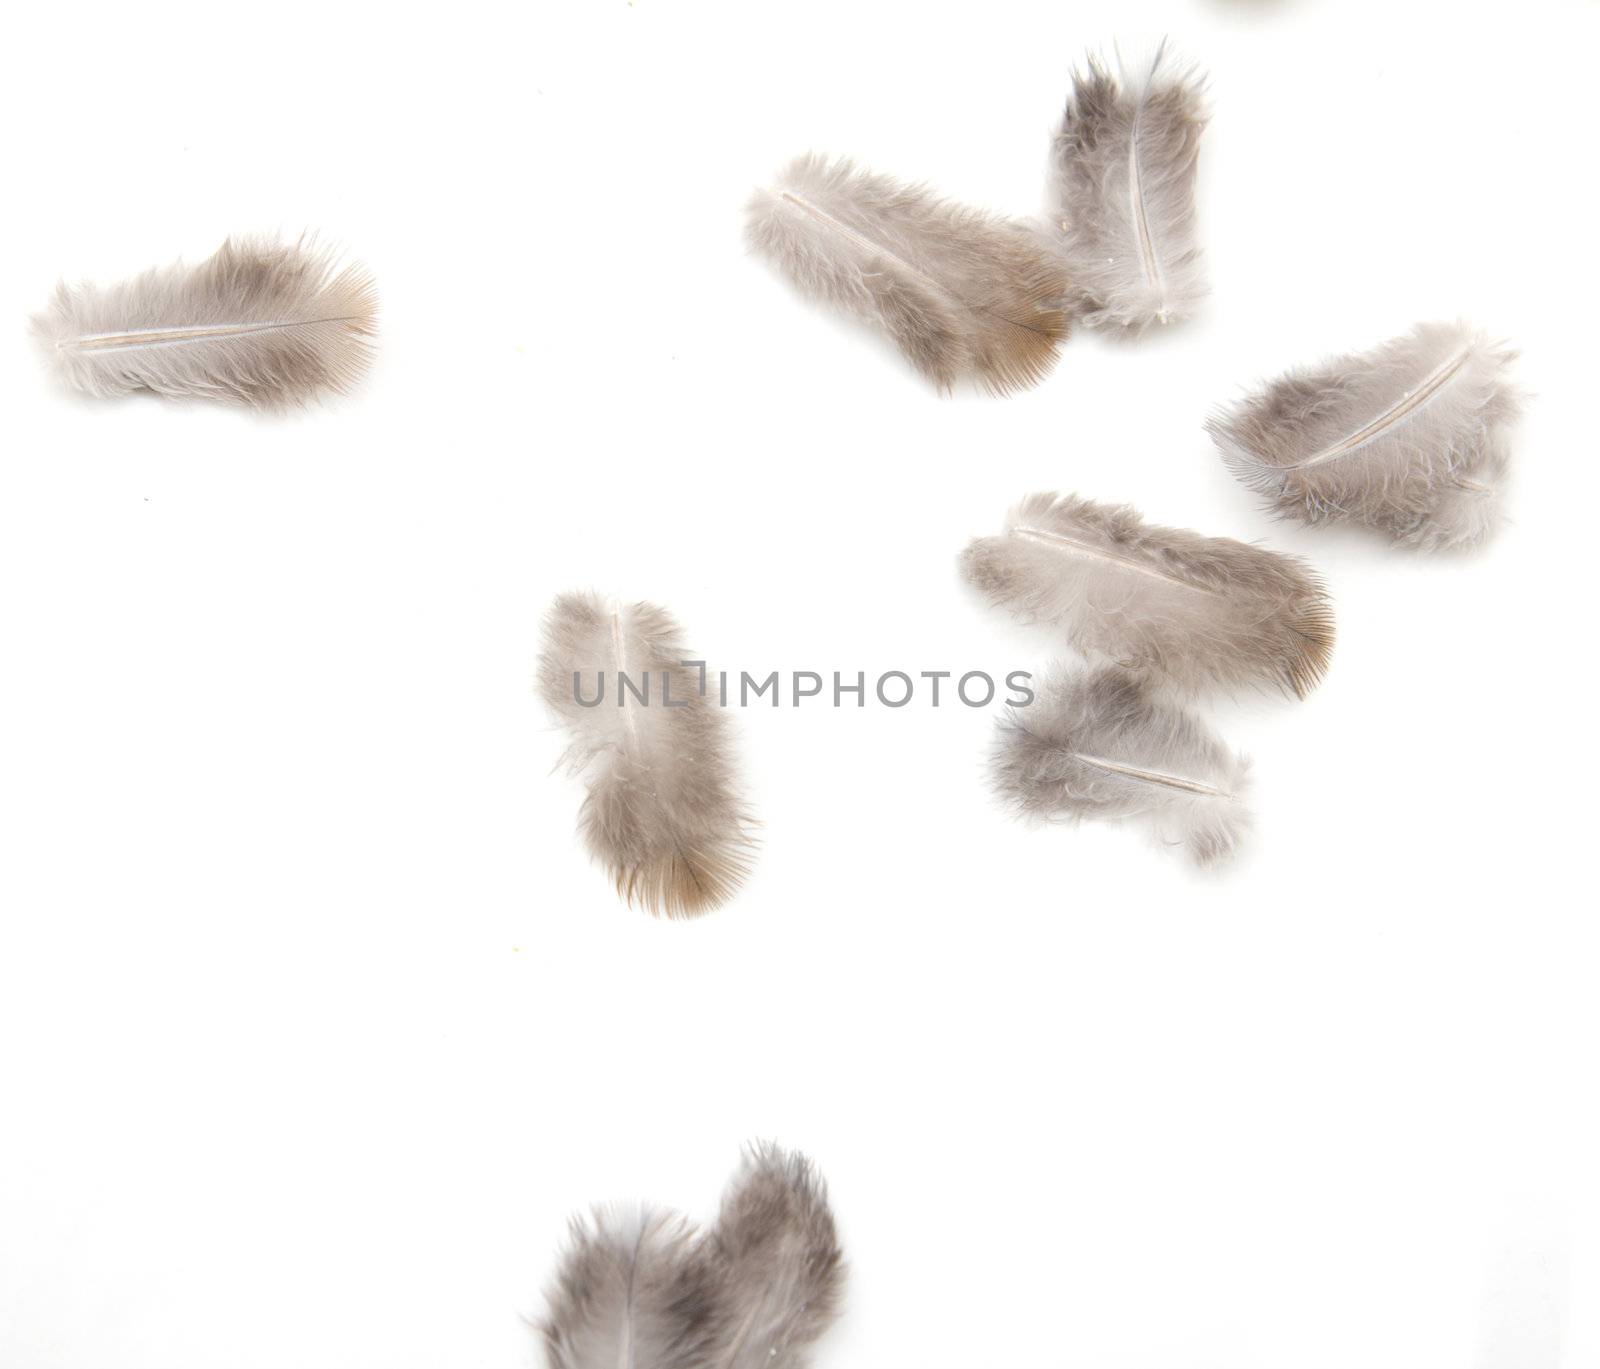 feathers on a white background by schankz